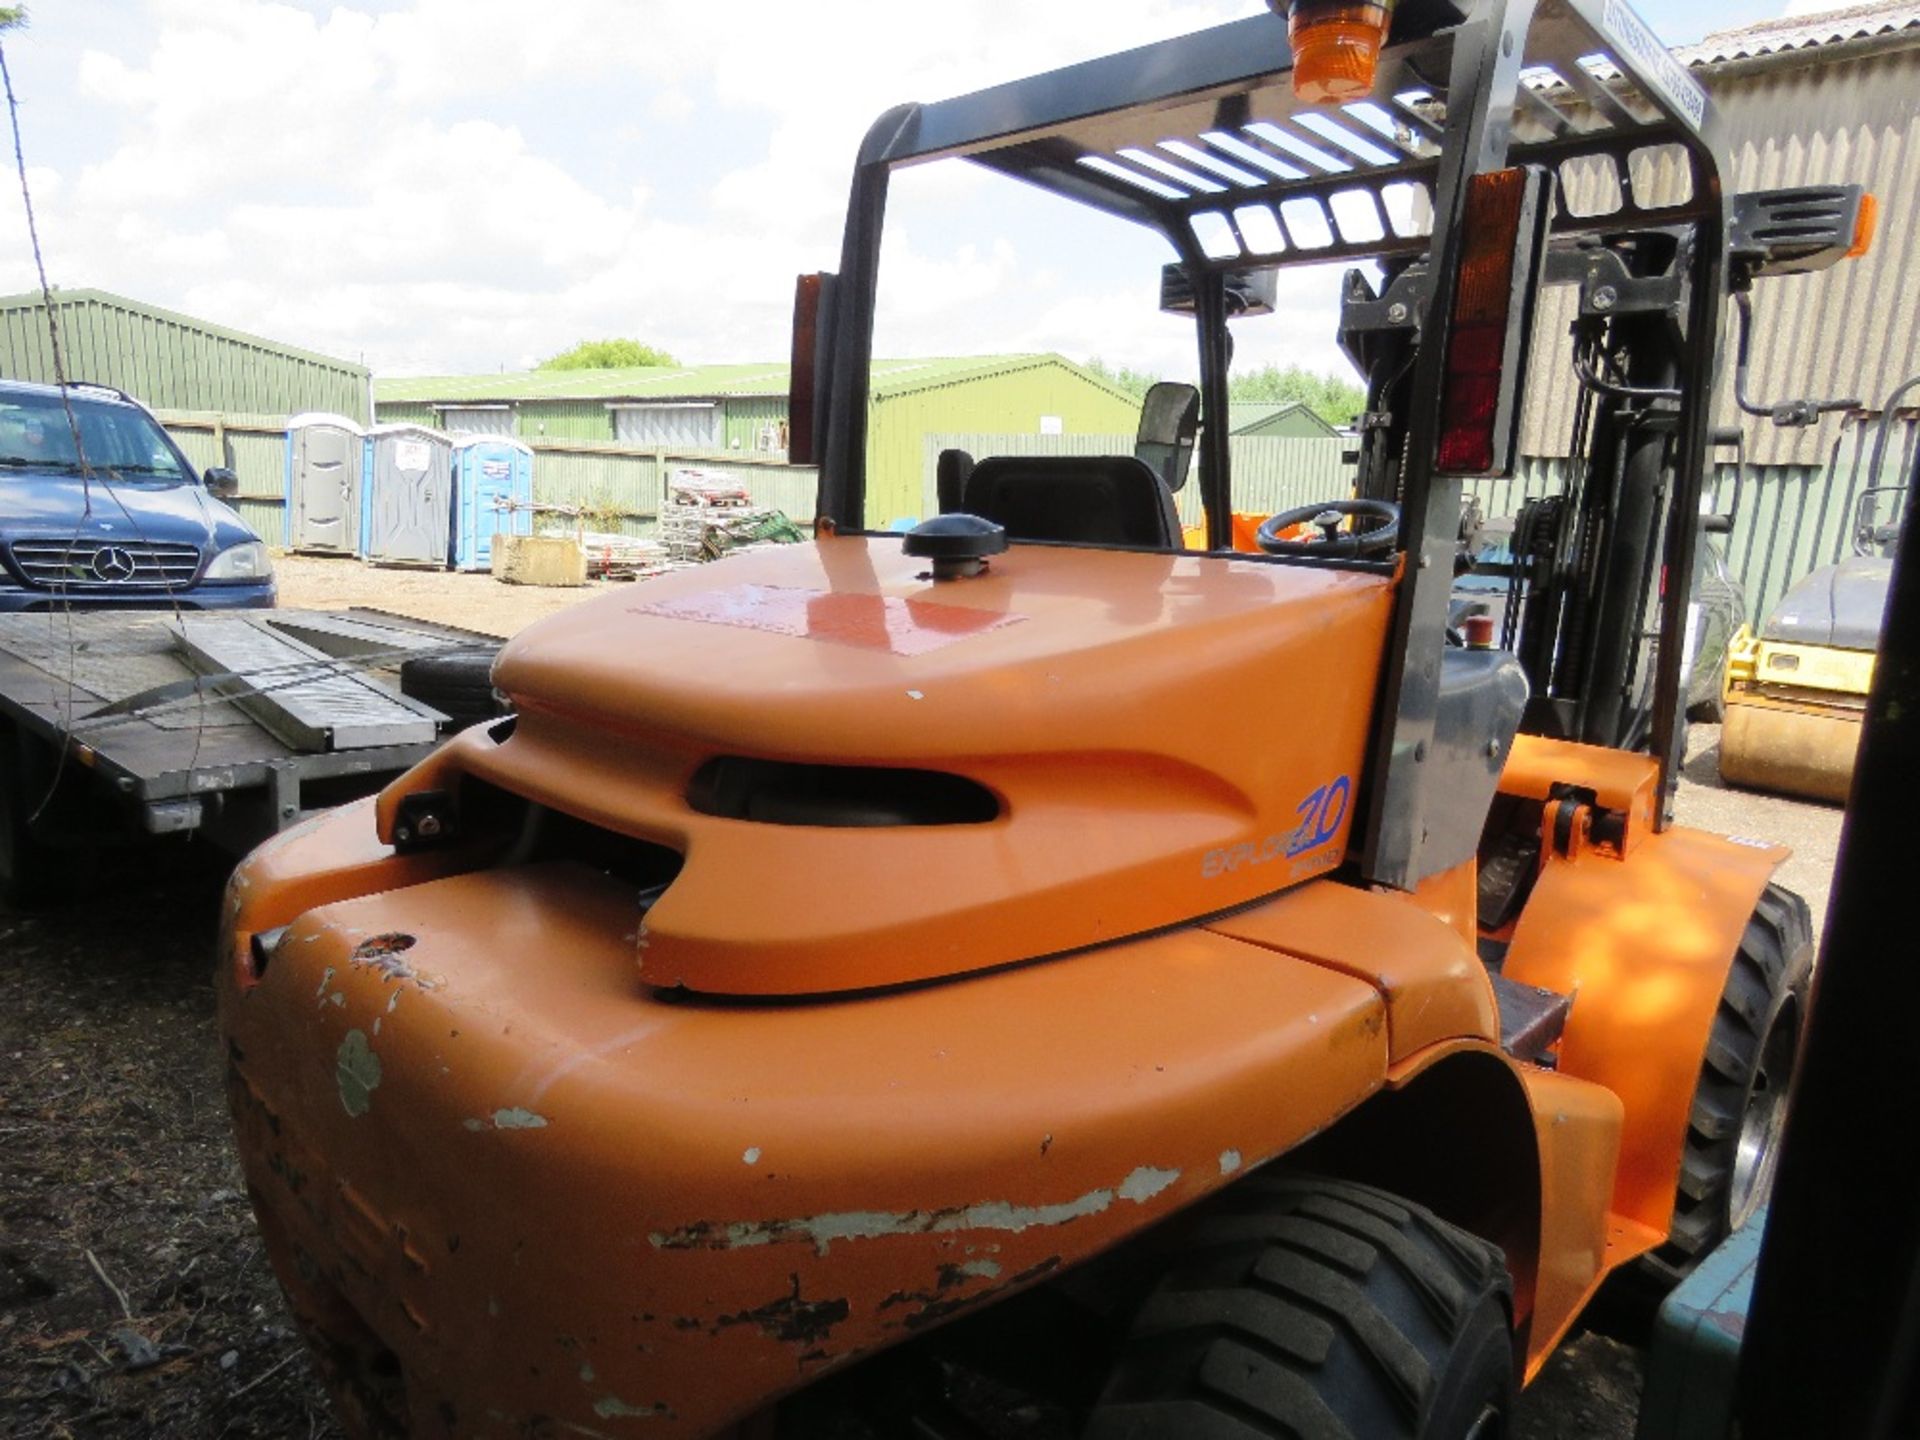 MAST EXPLORER H20DL 2WD ROUGH TERRAIN FORKLIFT TRUCK, YEAR 2007. 2706 REC HOURS. SN:2HD6429B. SIDE S - Image 3 of 9